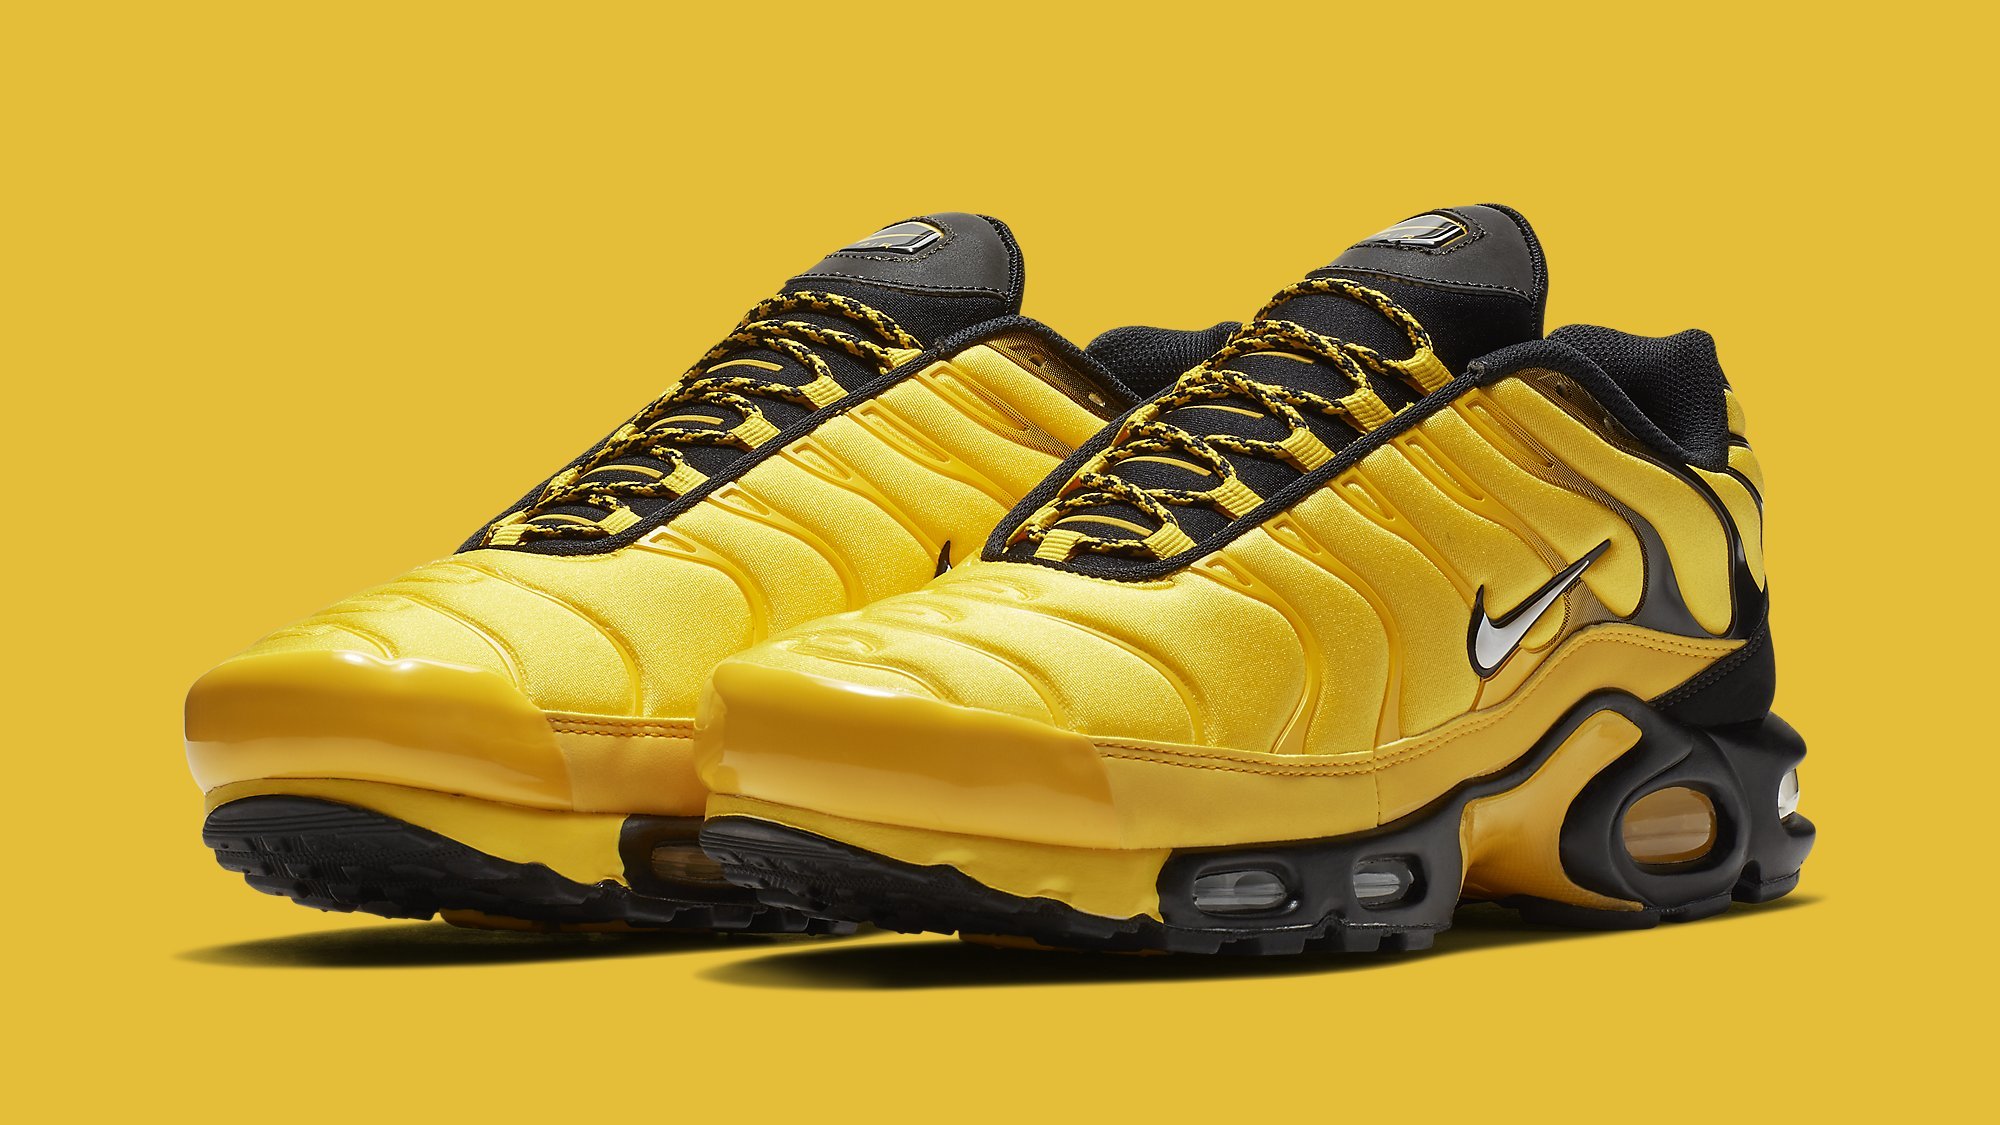 Nike Air Max Plus Just Do It for the 